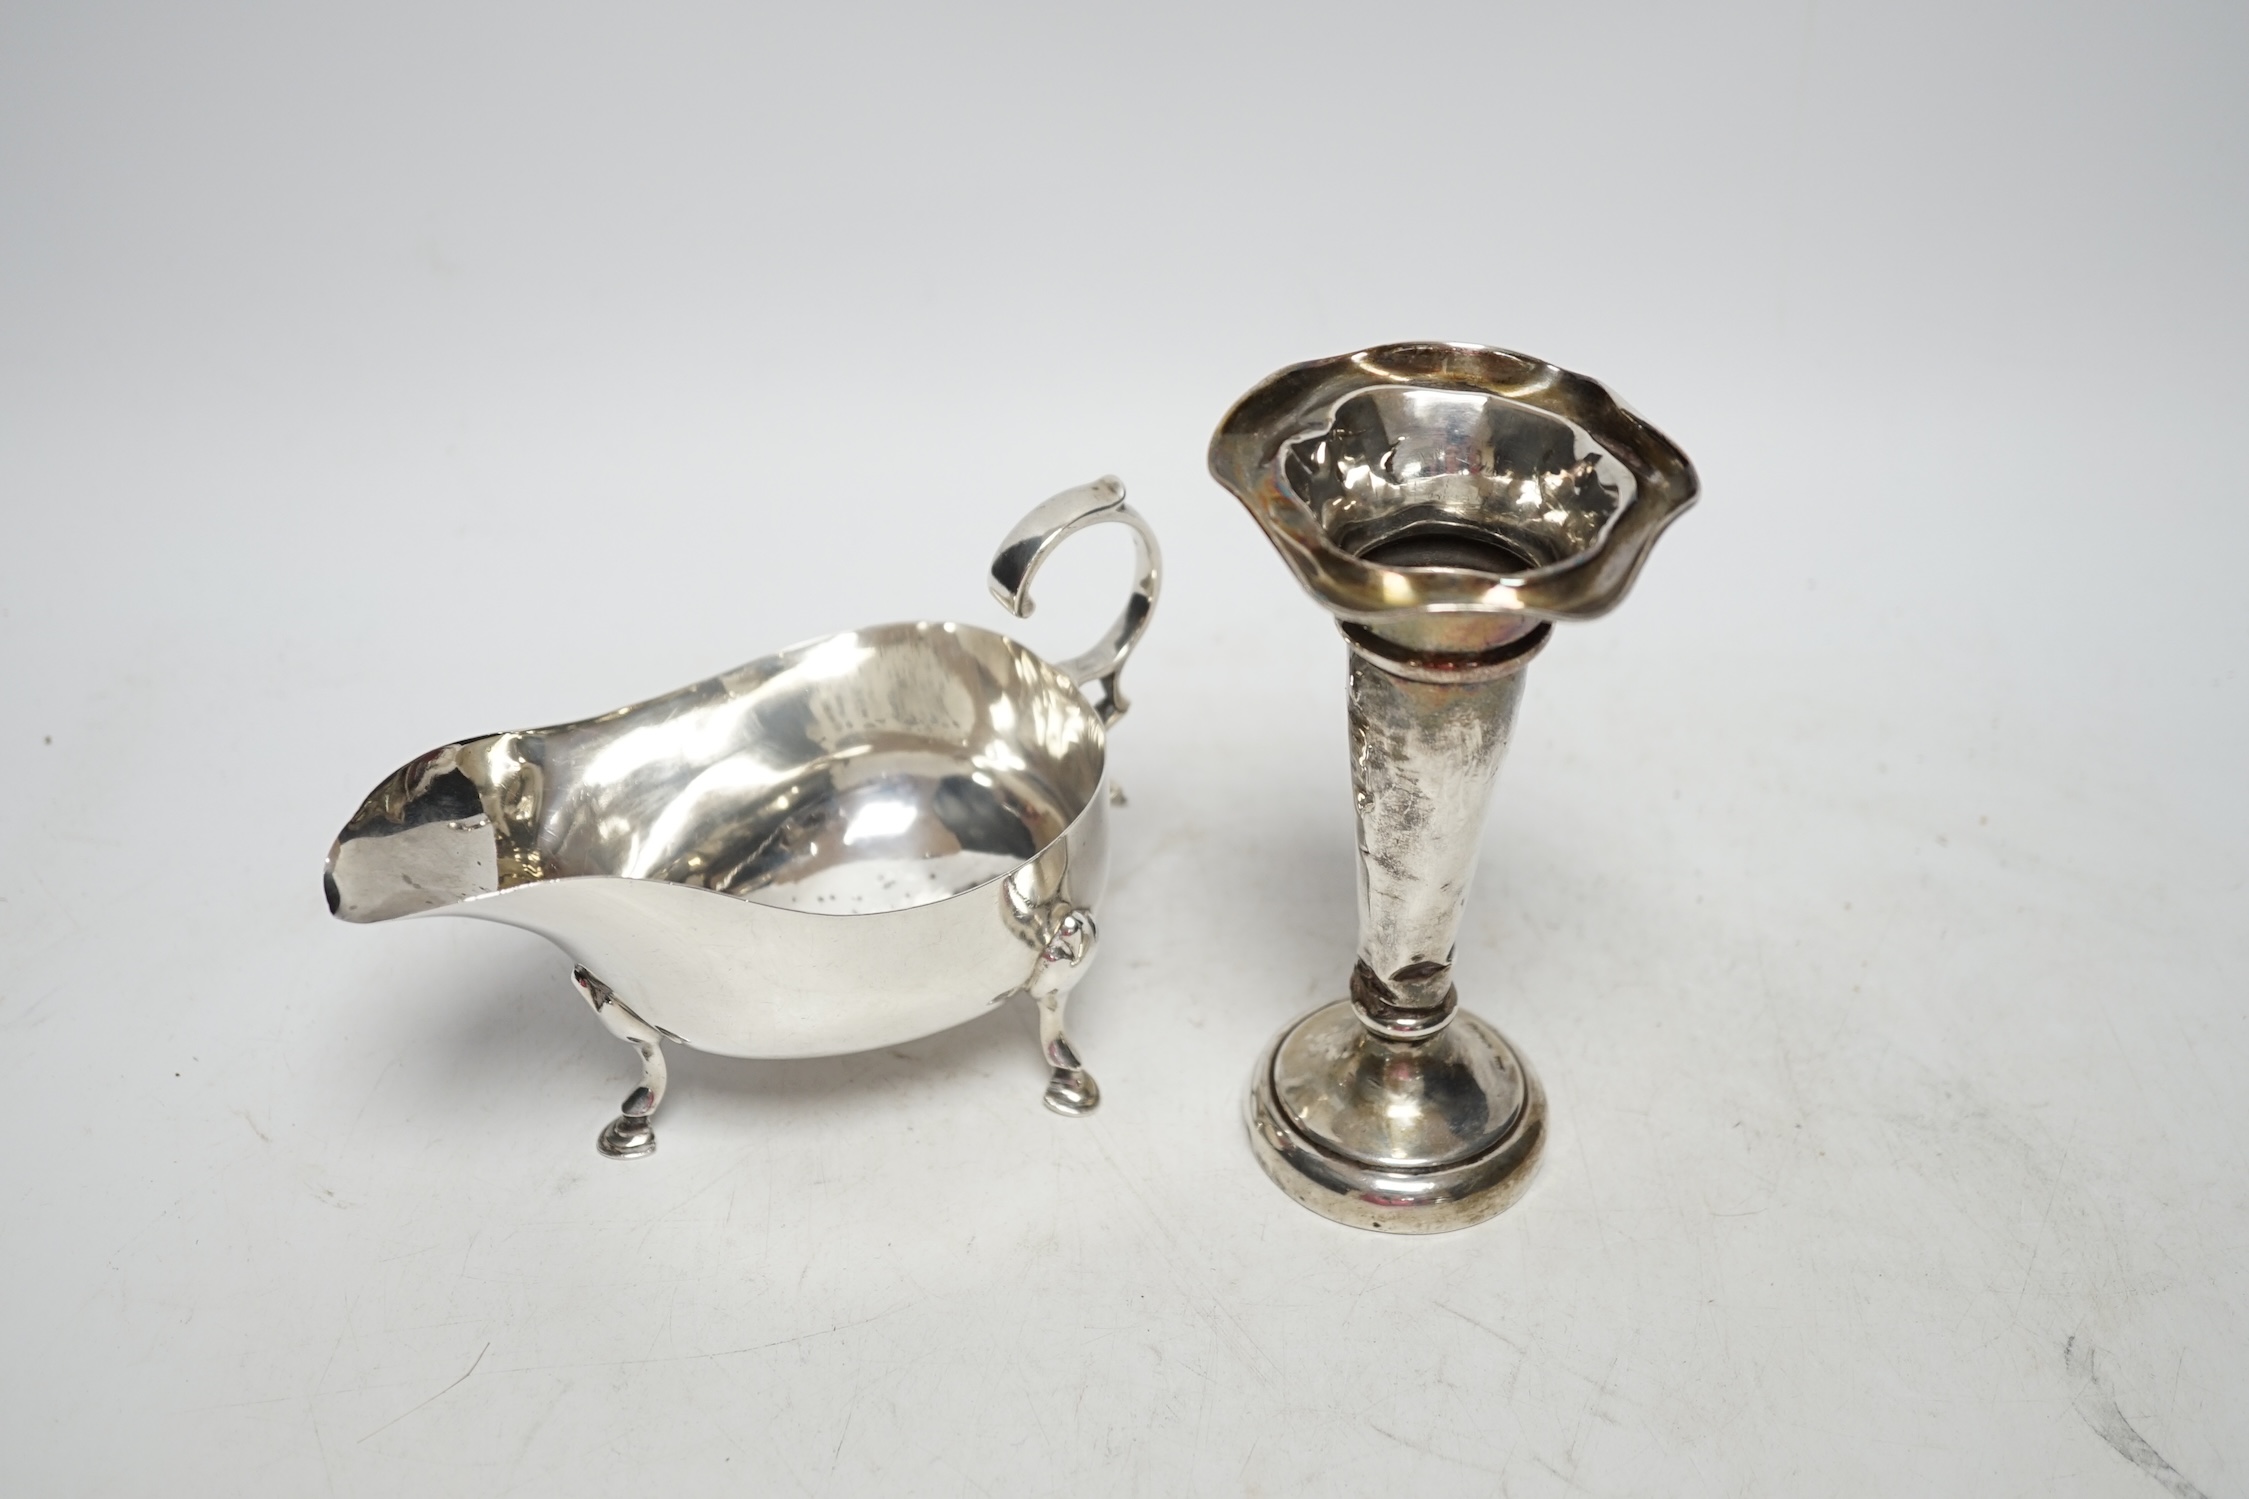 A George V silver sauceboat, Sheffield 1925, 14.5cm, 4.2oz and a similar silver mounted posy vase. Fair and poor condition.